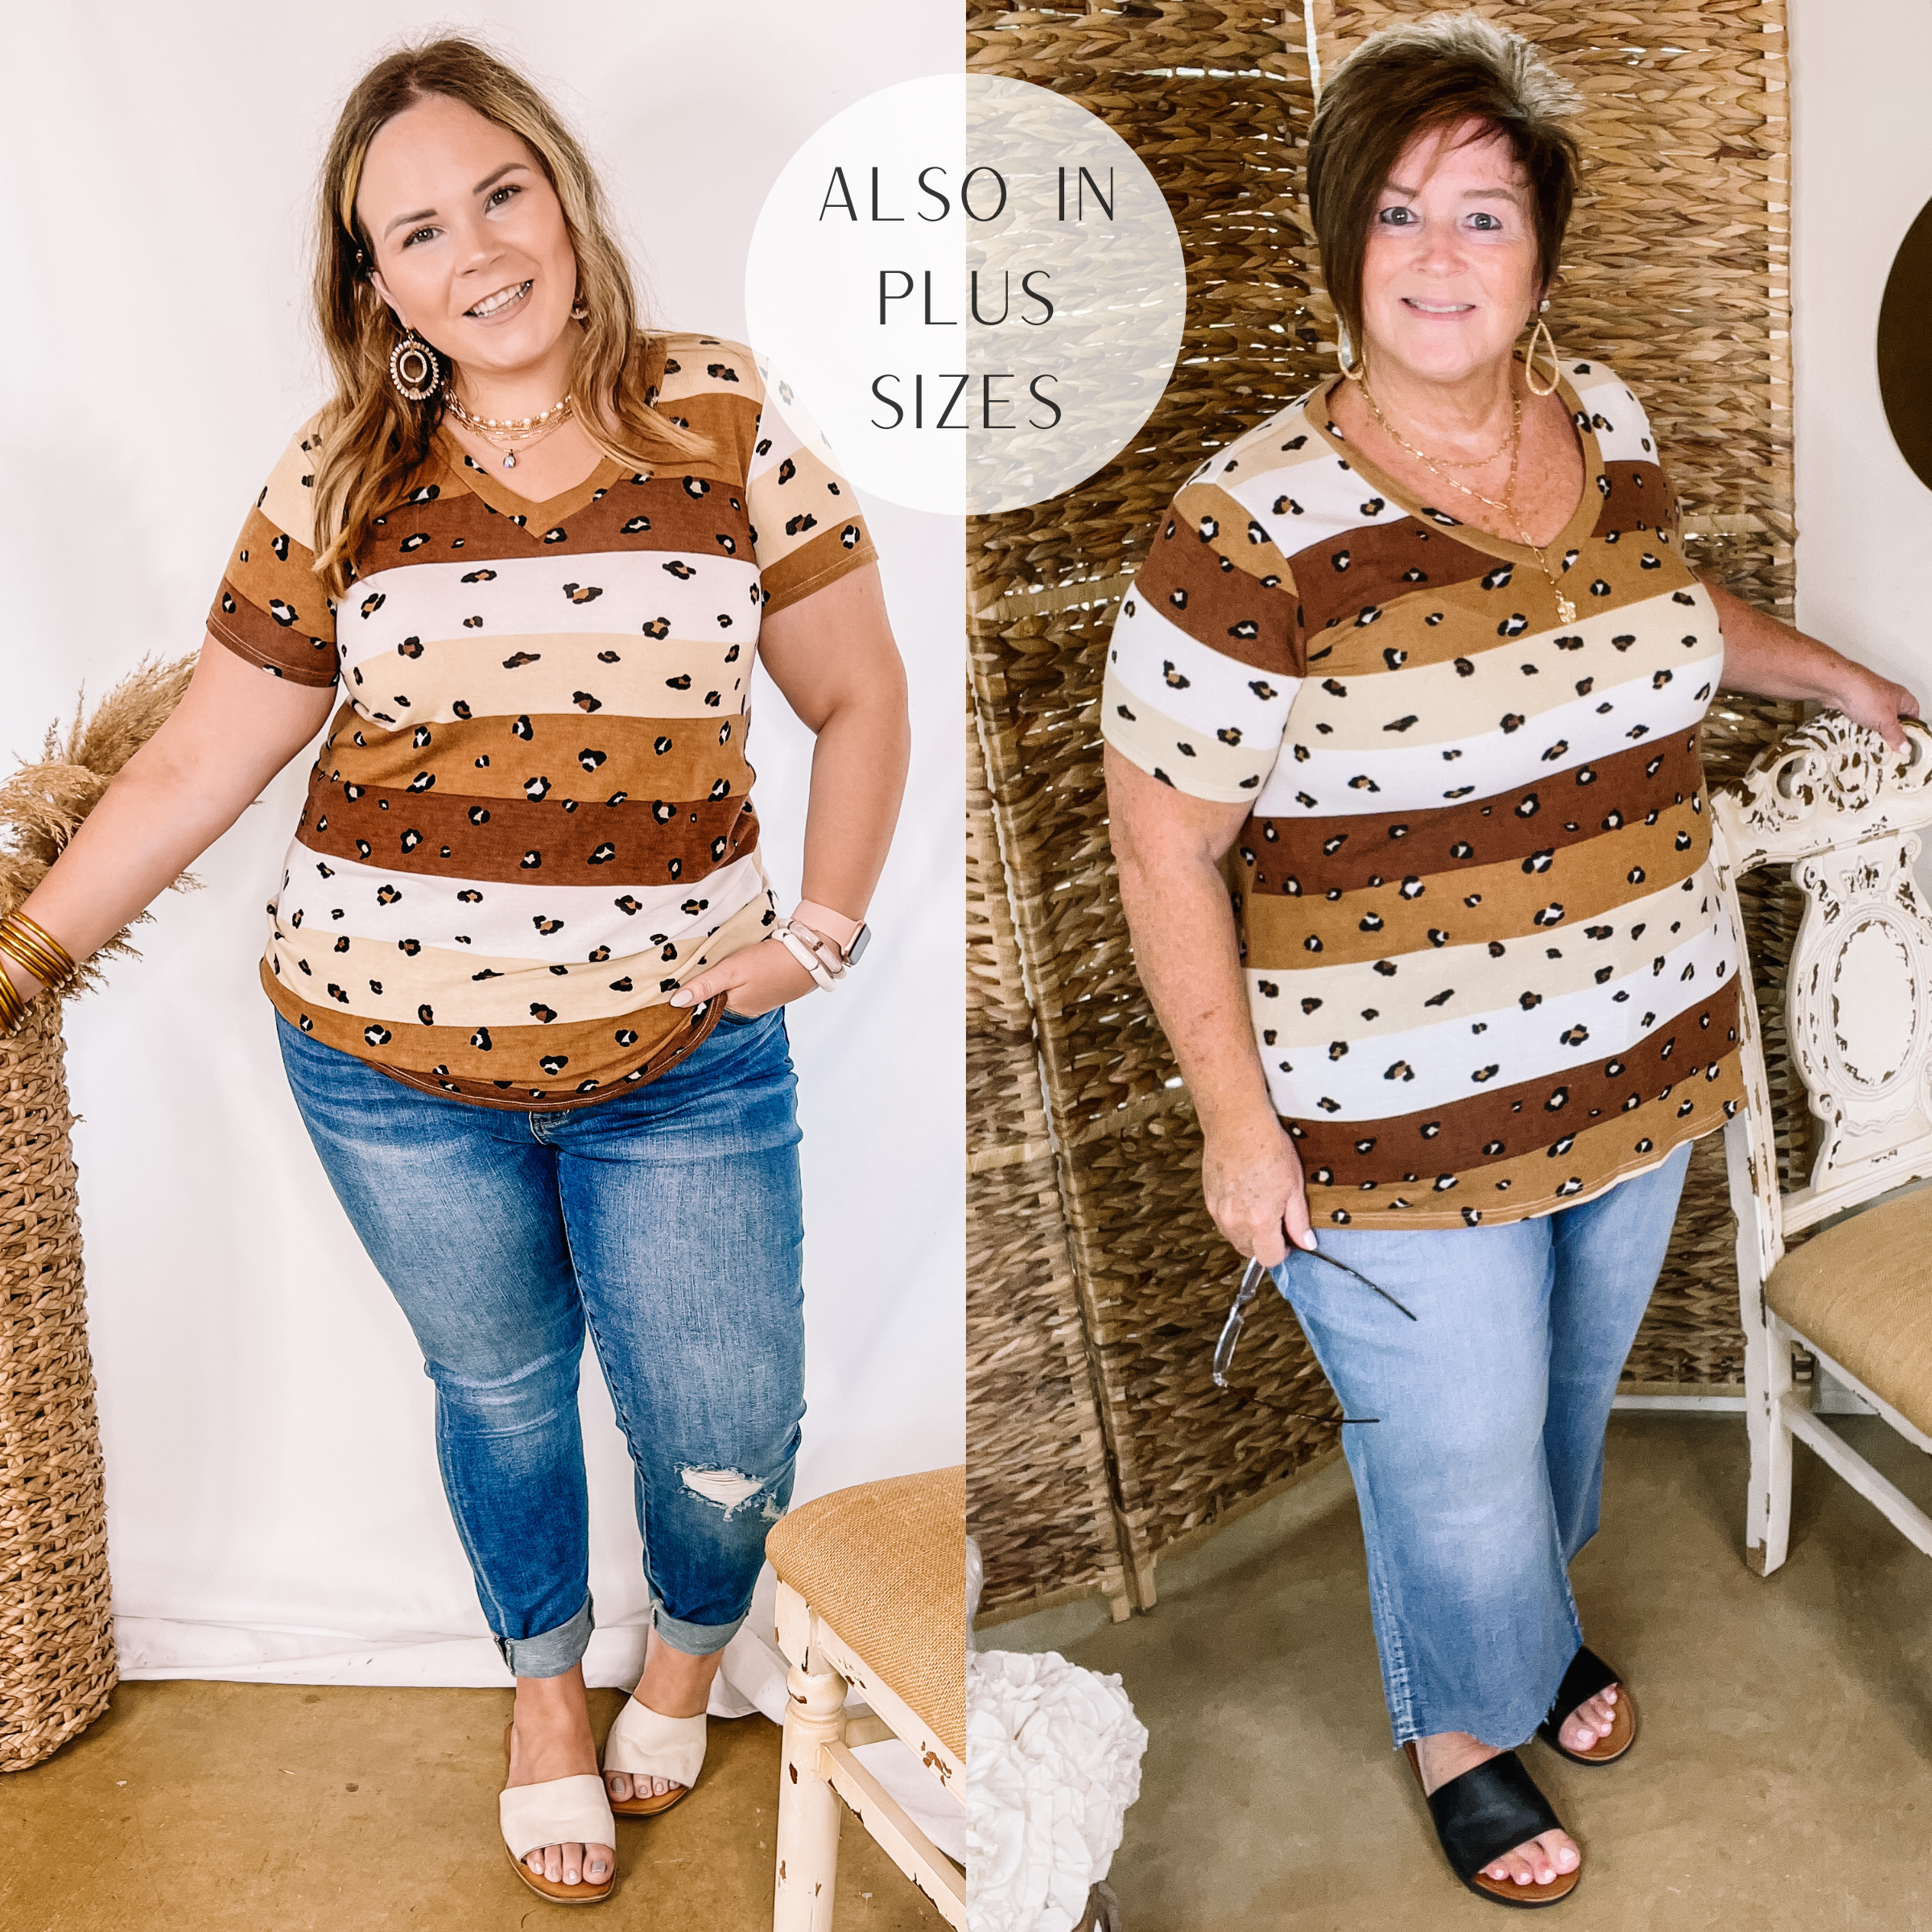 Model is wearing a v neck tee with a striped print with leopard spots. This tee is a mix of brown and beige. Model has it paired with cuffed jeans, white sandals, and gold jewelry.